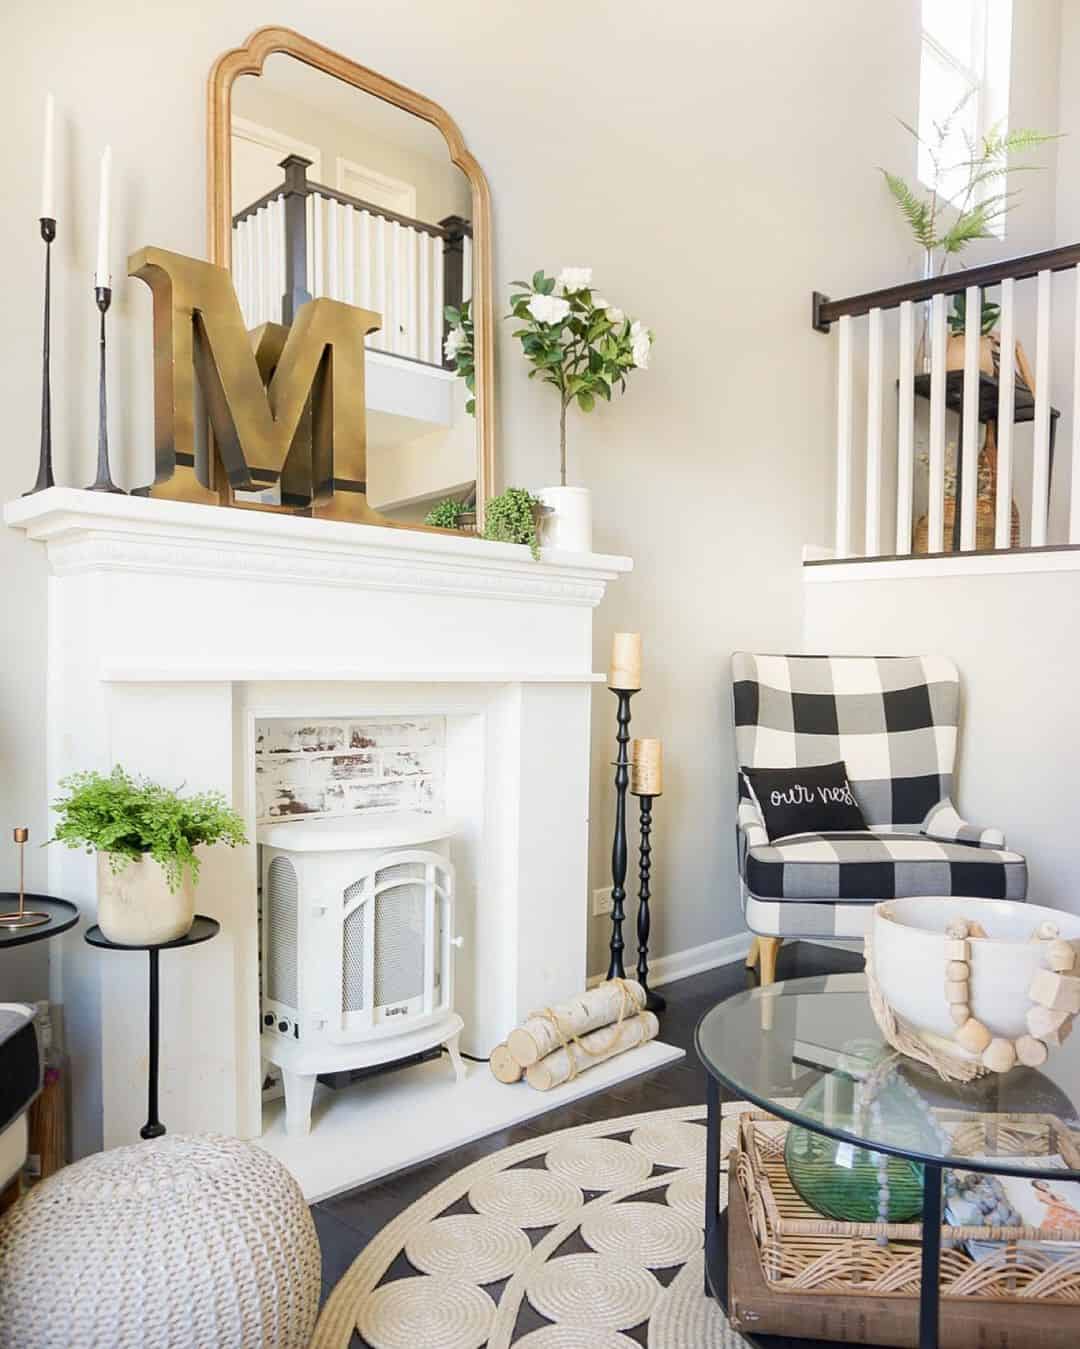 Mirror above fireplace ideas; In neutral rooms, the addition of brass and gold tones brings a cozy and welcoming atmosphere. To achieve an elegant effect, consider pairing the mirror with another decor piece in a similar or contrasting metal finish, creating a harmonious and visually appealing display like in this photo!